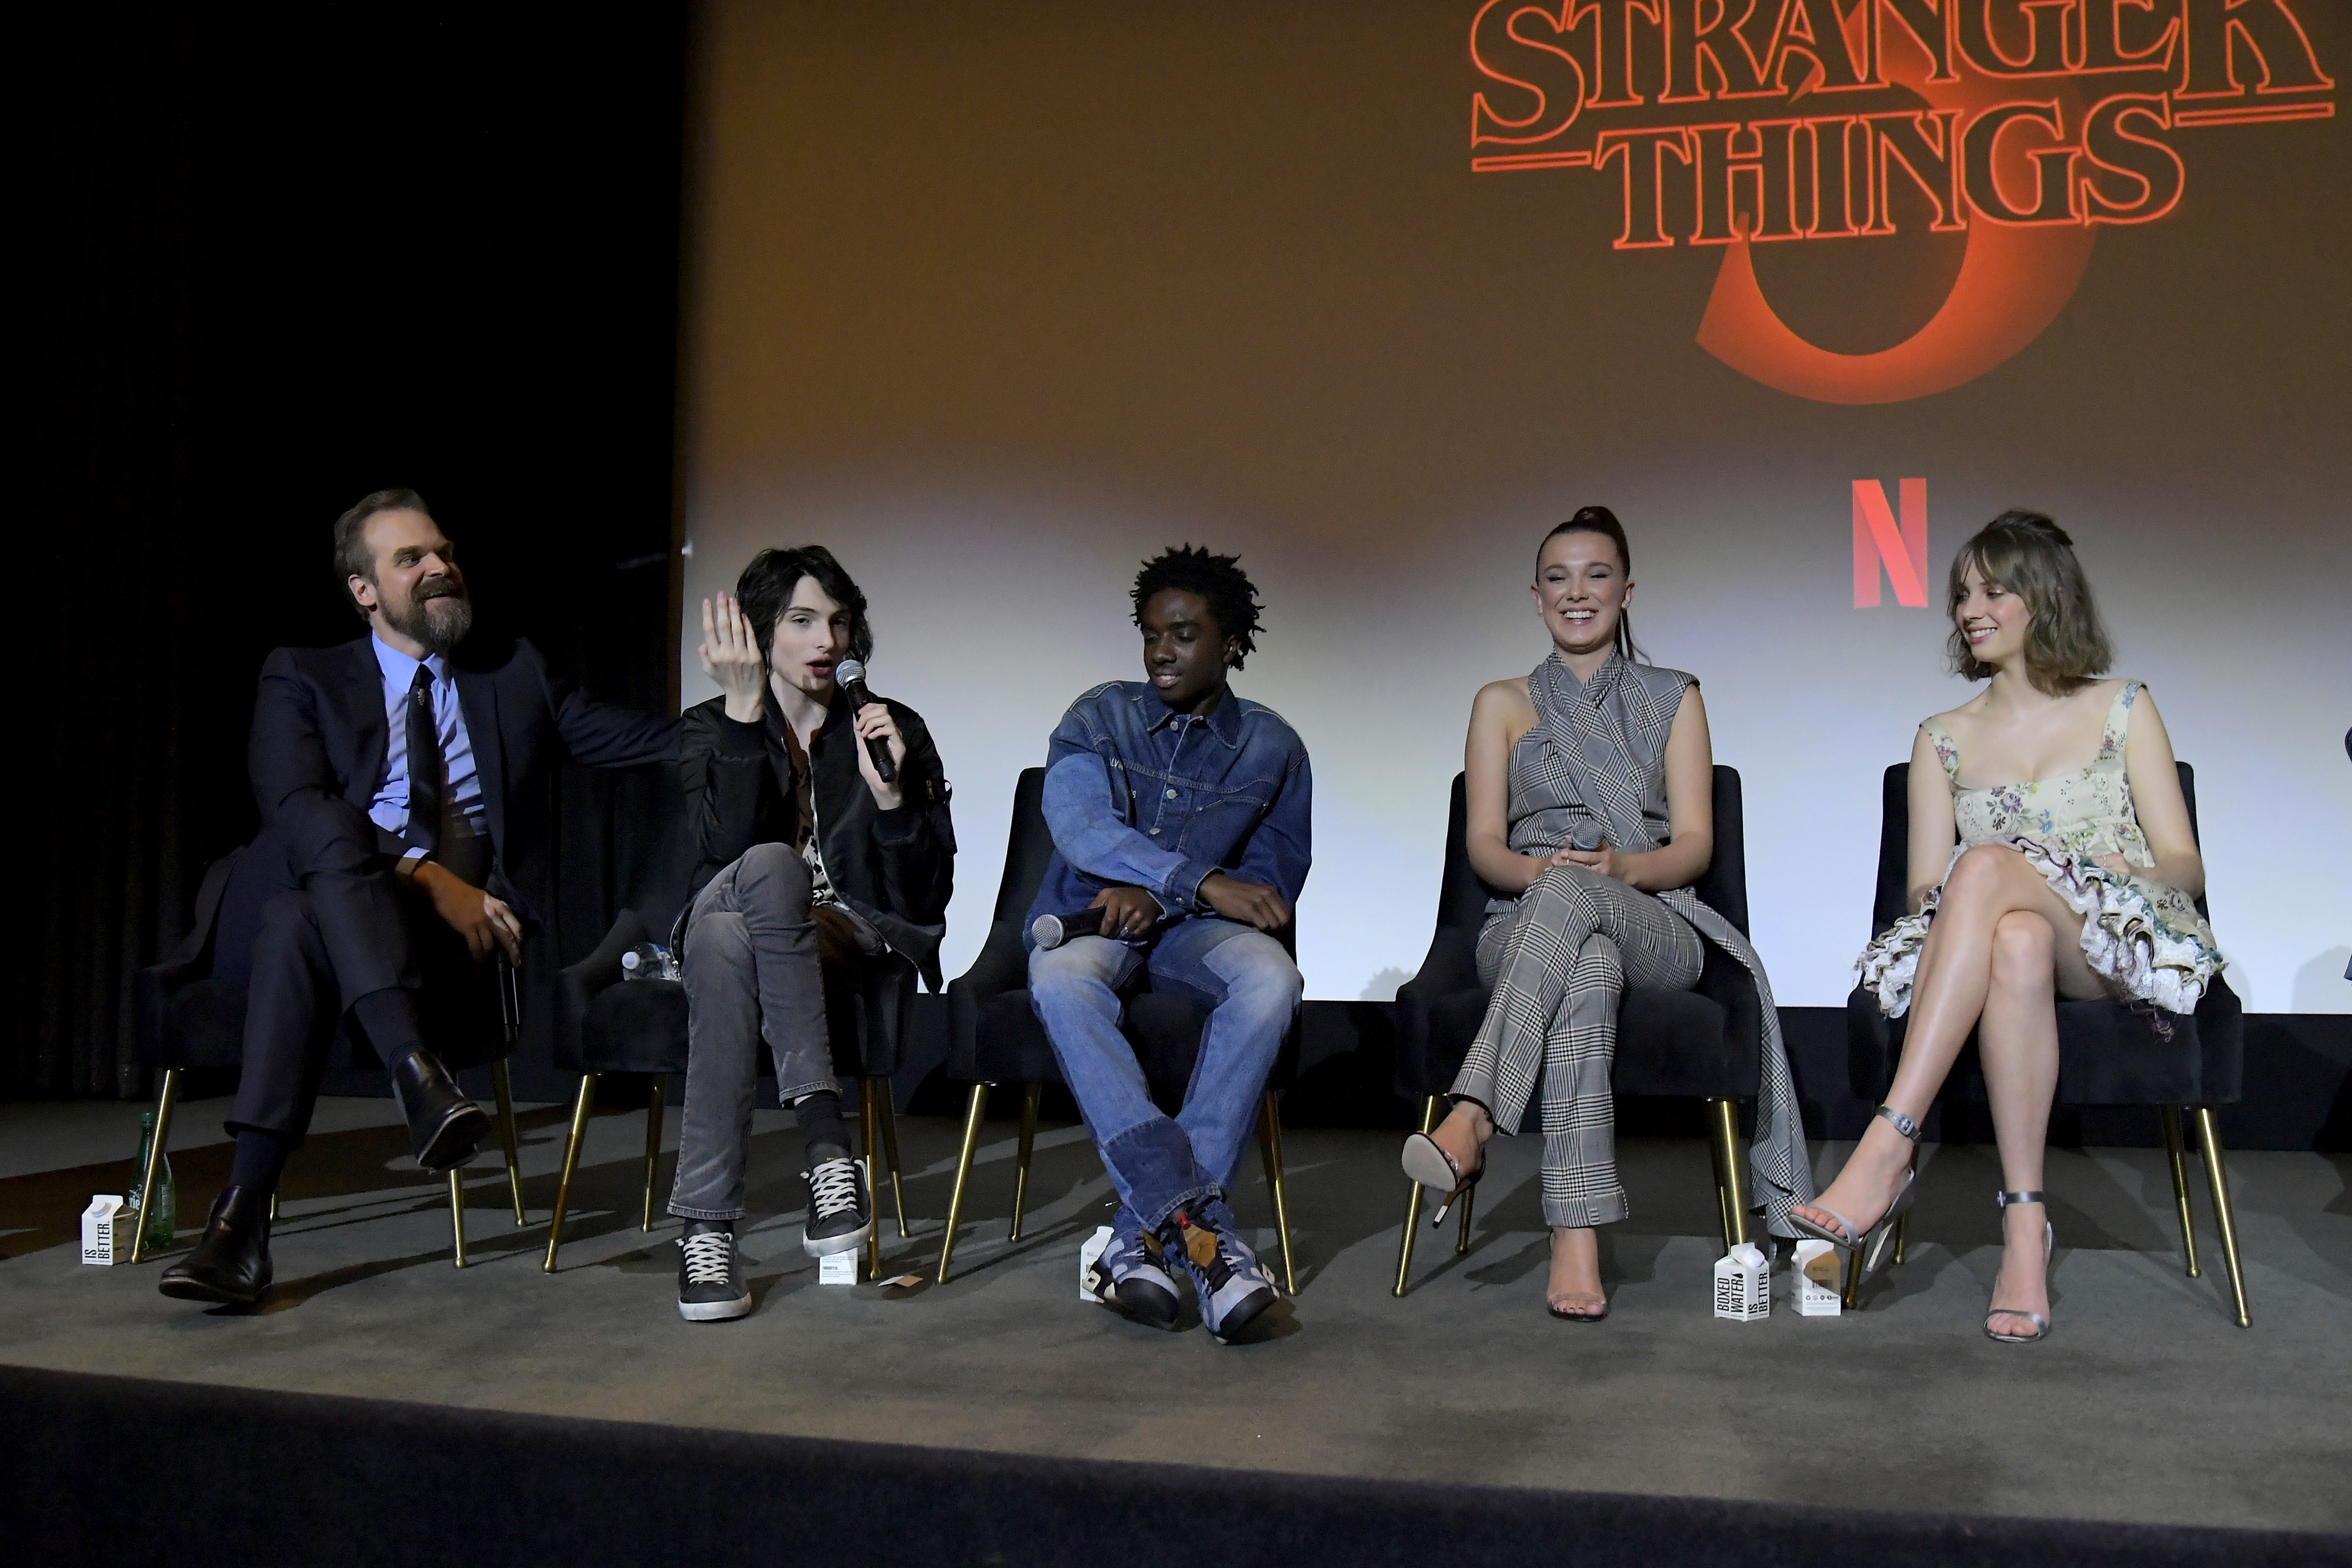 David Harbour, Finn Wolfhard, Caleb McLaughlin, Millie Bobby Brown, and Maya Hawke speak on stage during Netflix's 'Stranger Things' Q&A